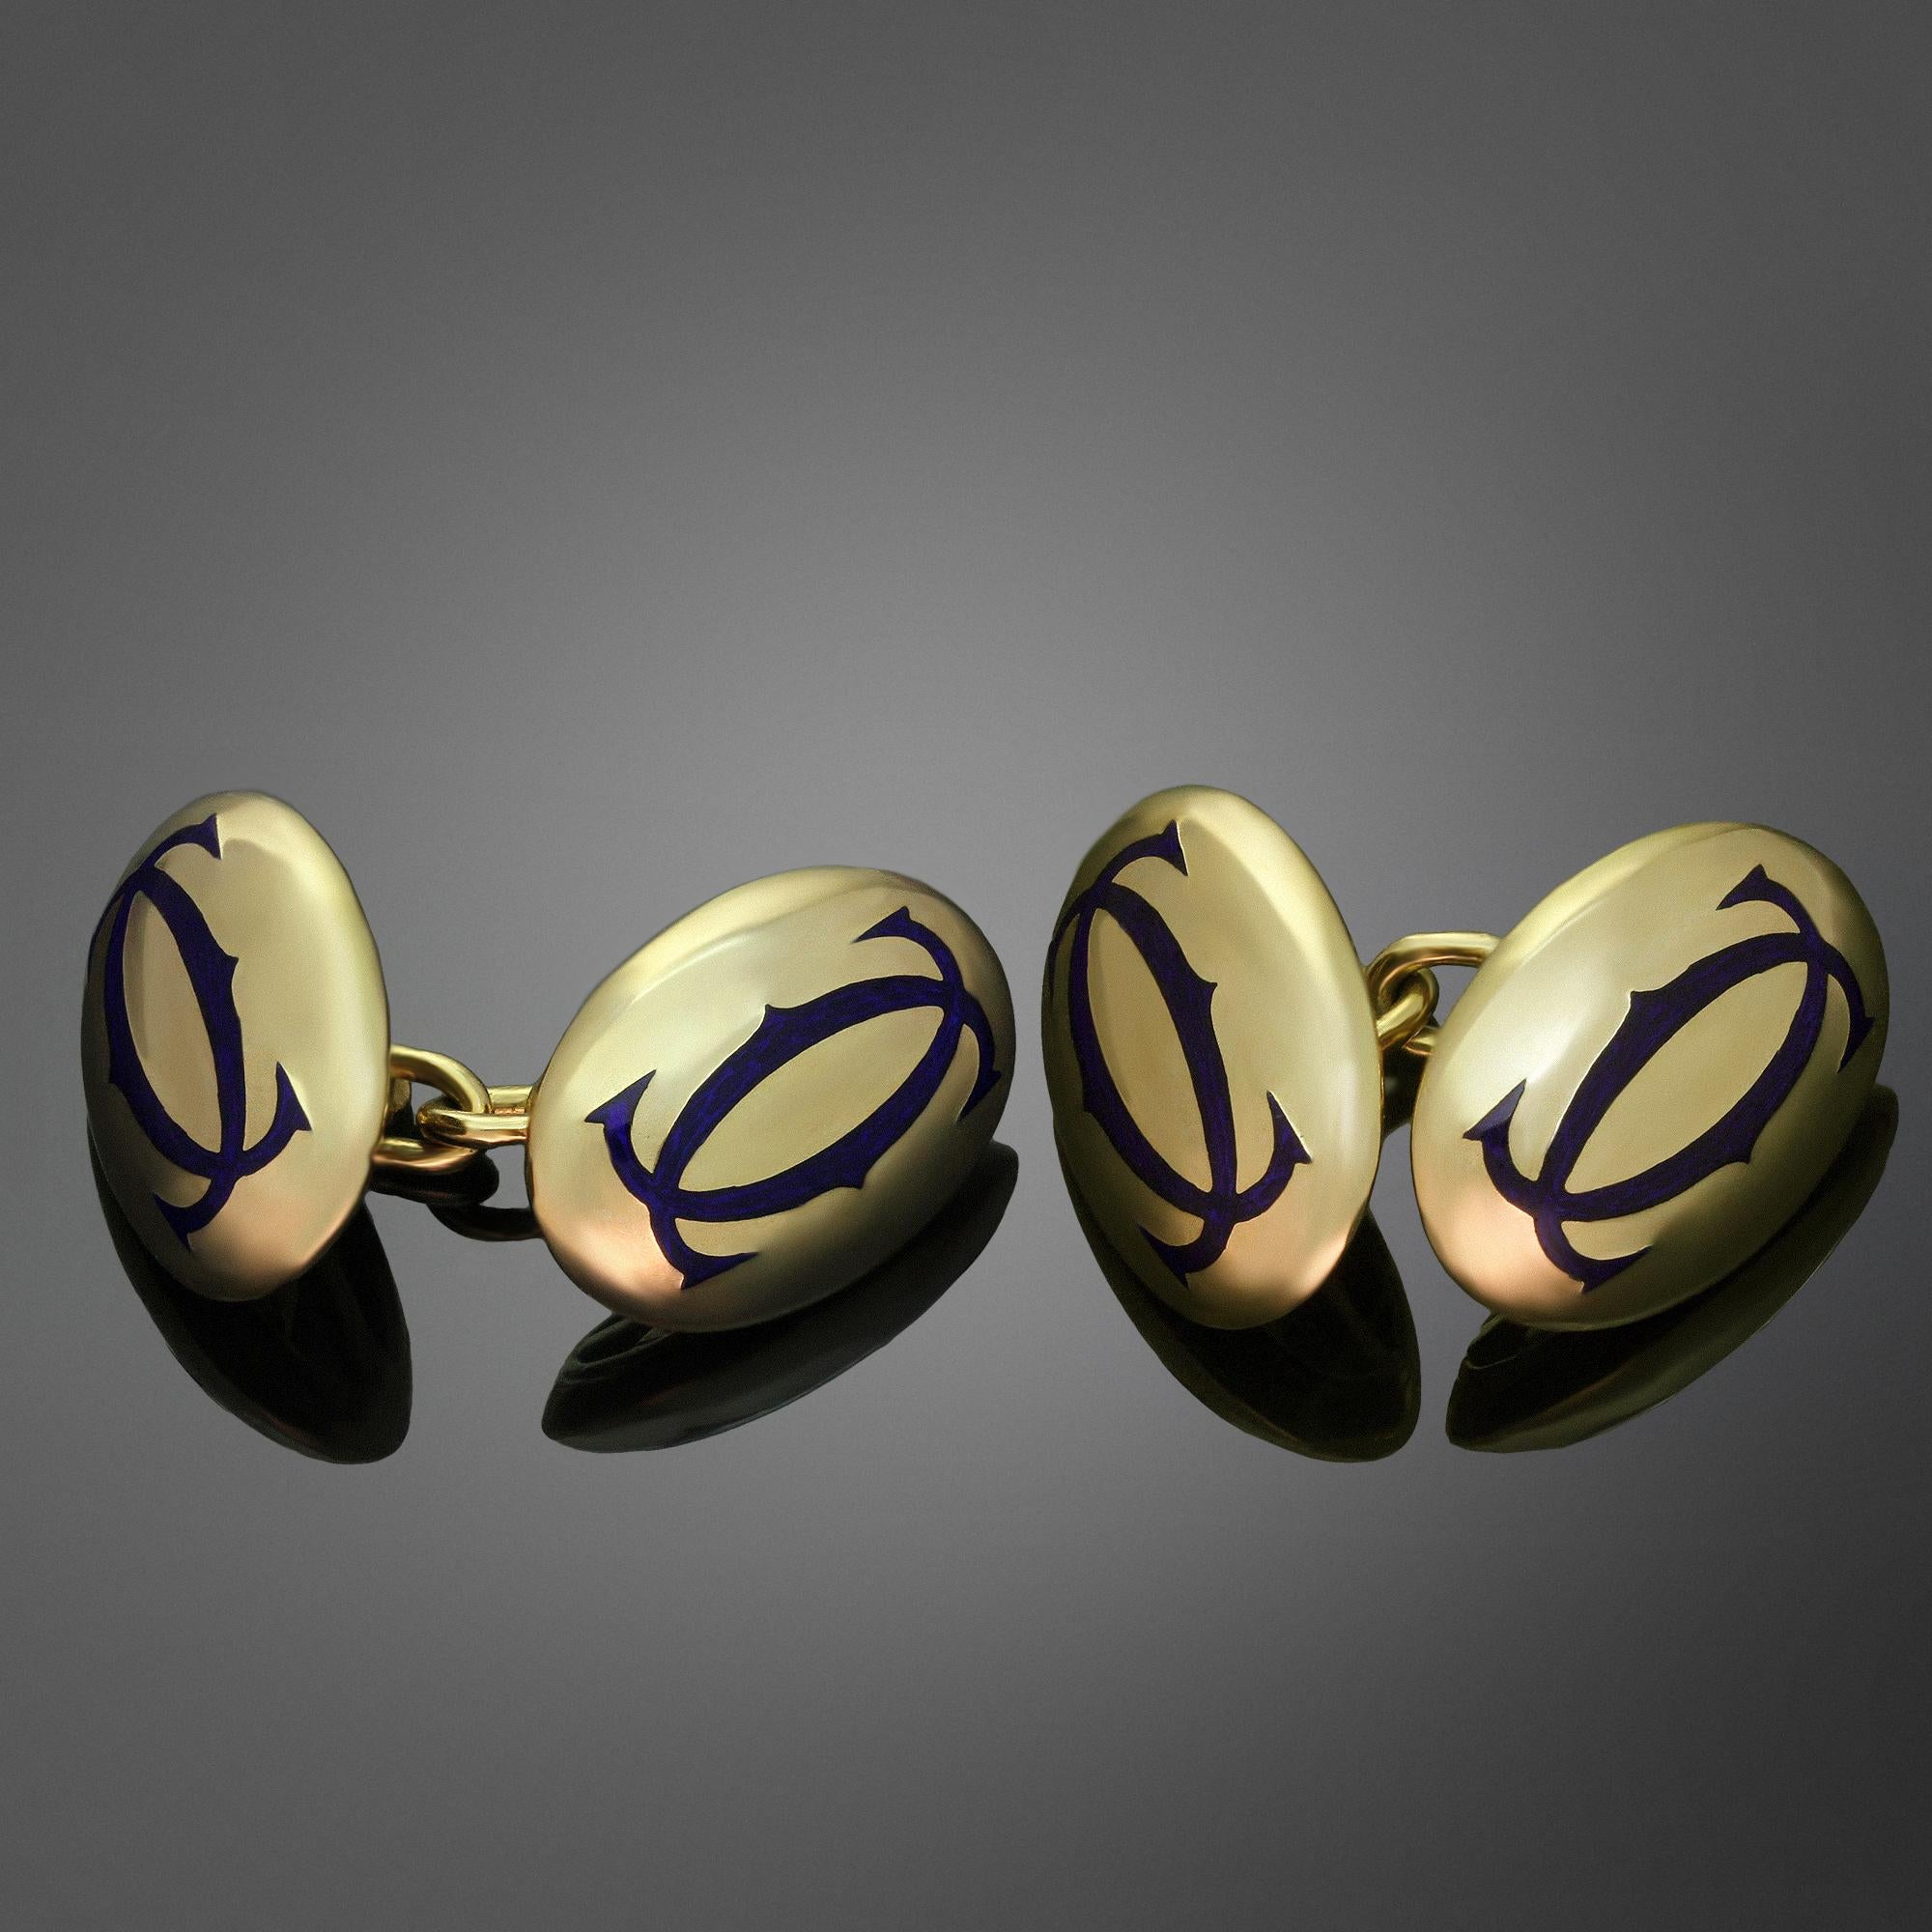 These classic oval Cartier cufflinks are crafted in 18k yellow gold and feature blue enamel accents. Made in France circa 1980s. Excellent condition. Comes in an unbranded gift box.